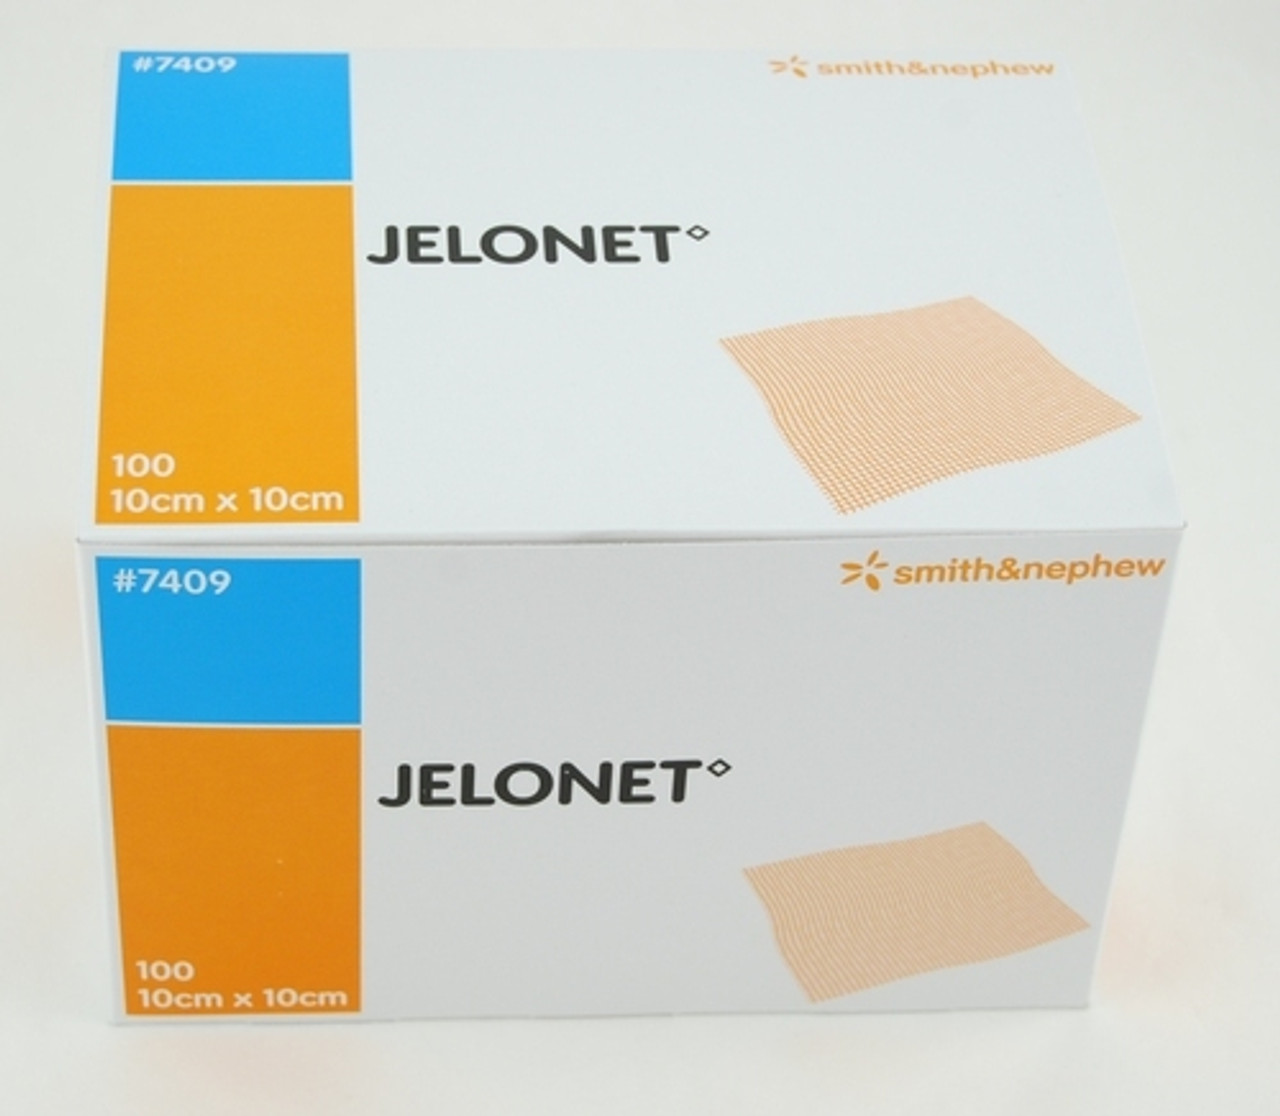 DRESSING JELONET TULLE GRAS 10x10cm LTX FREE IND WRPD BX/100 185-7409